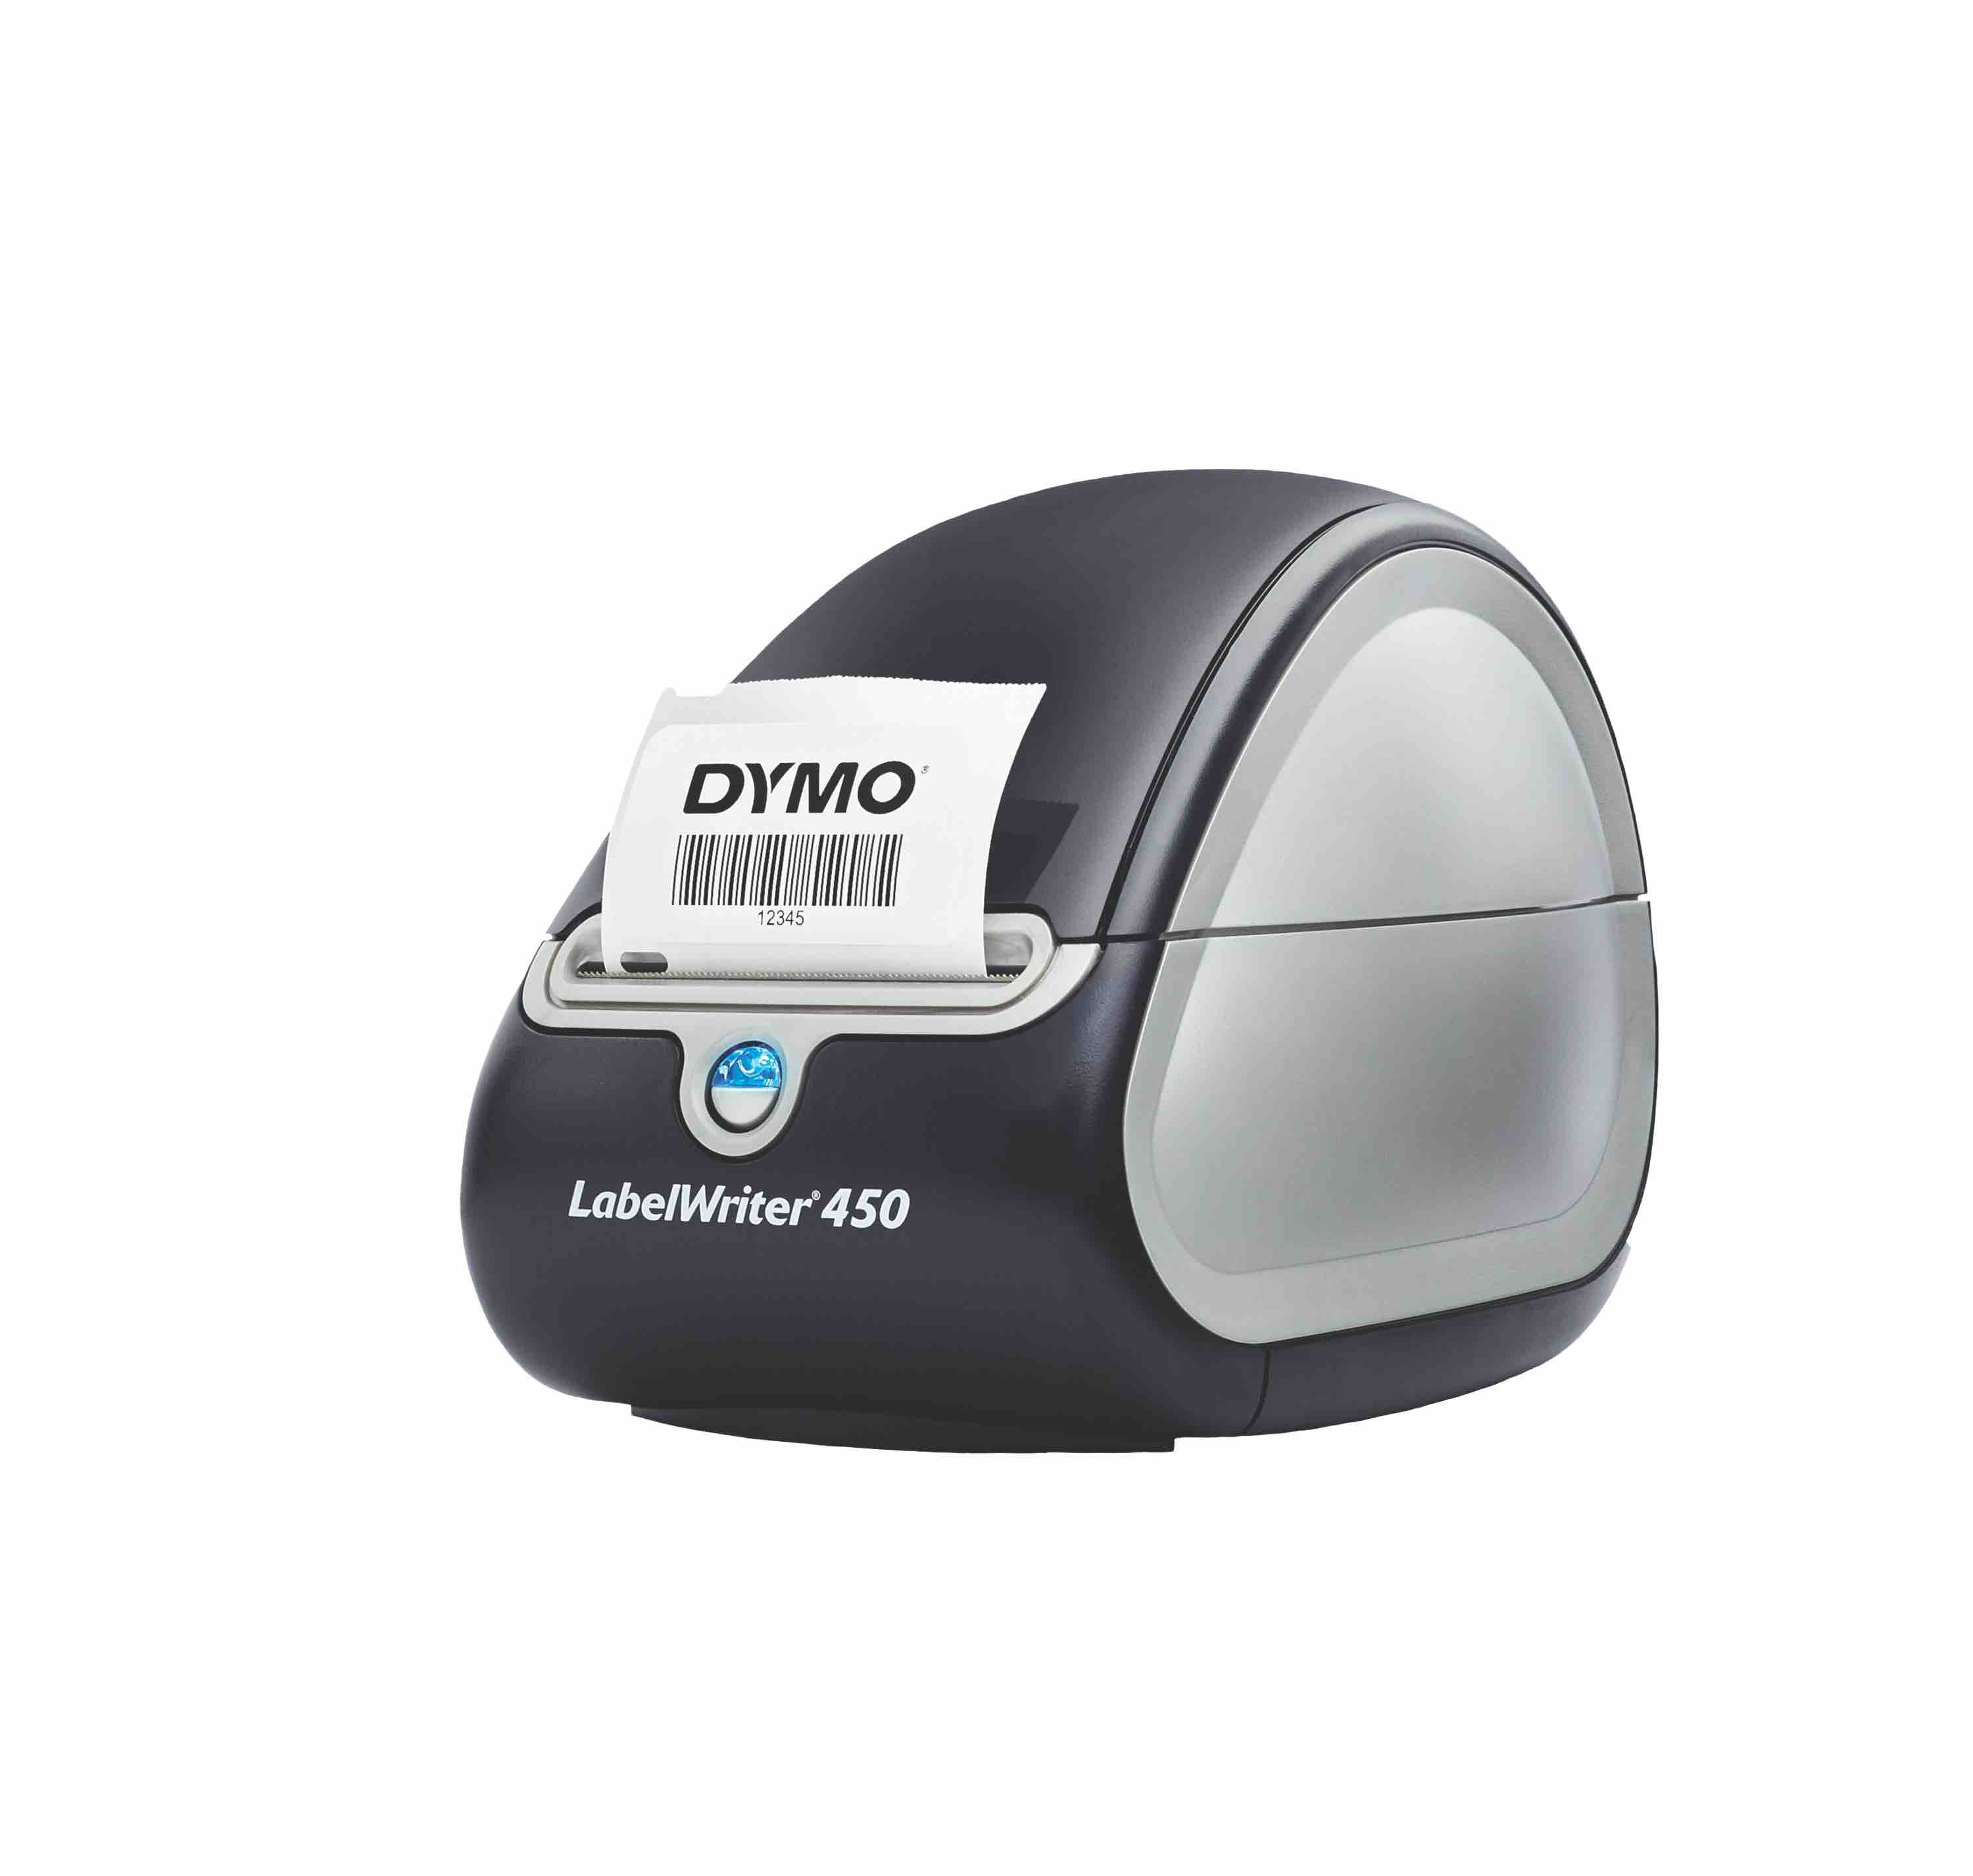 How to print barcodes on Dymo LabelWriter 450